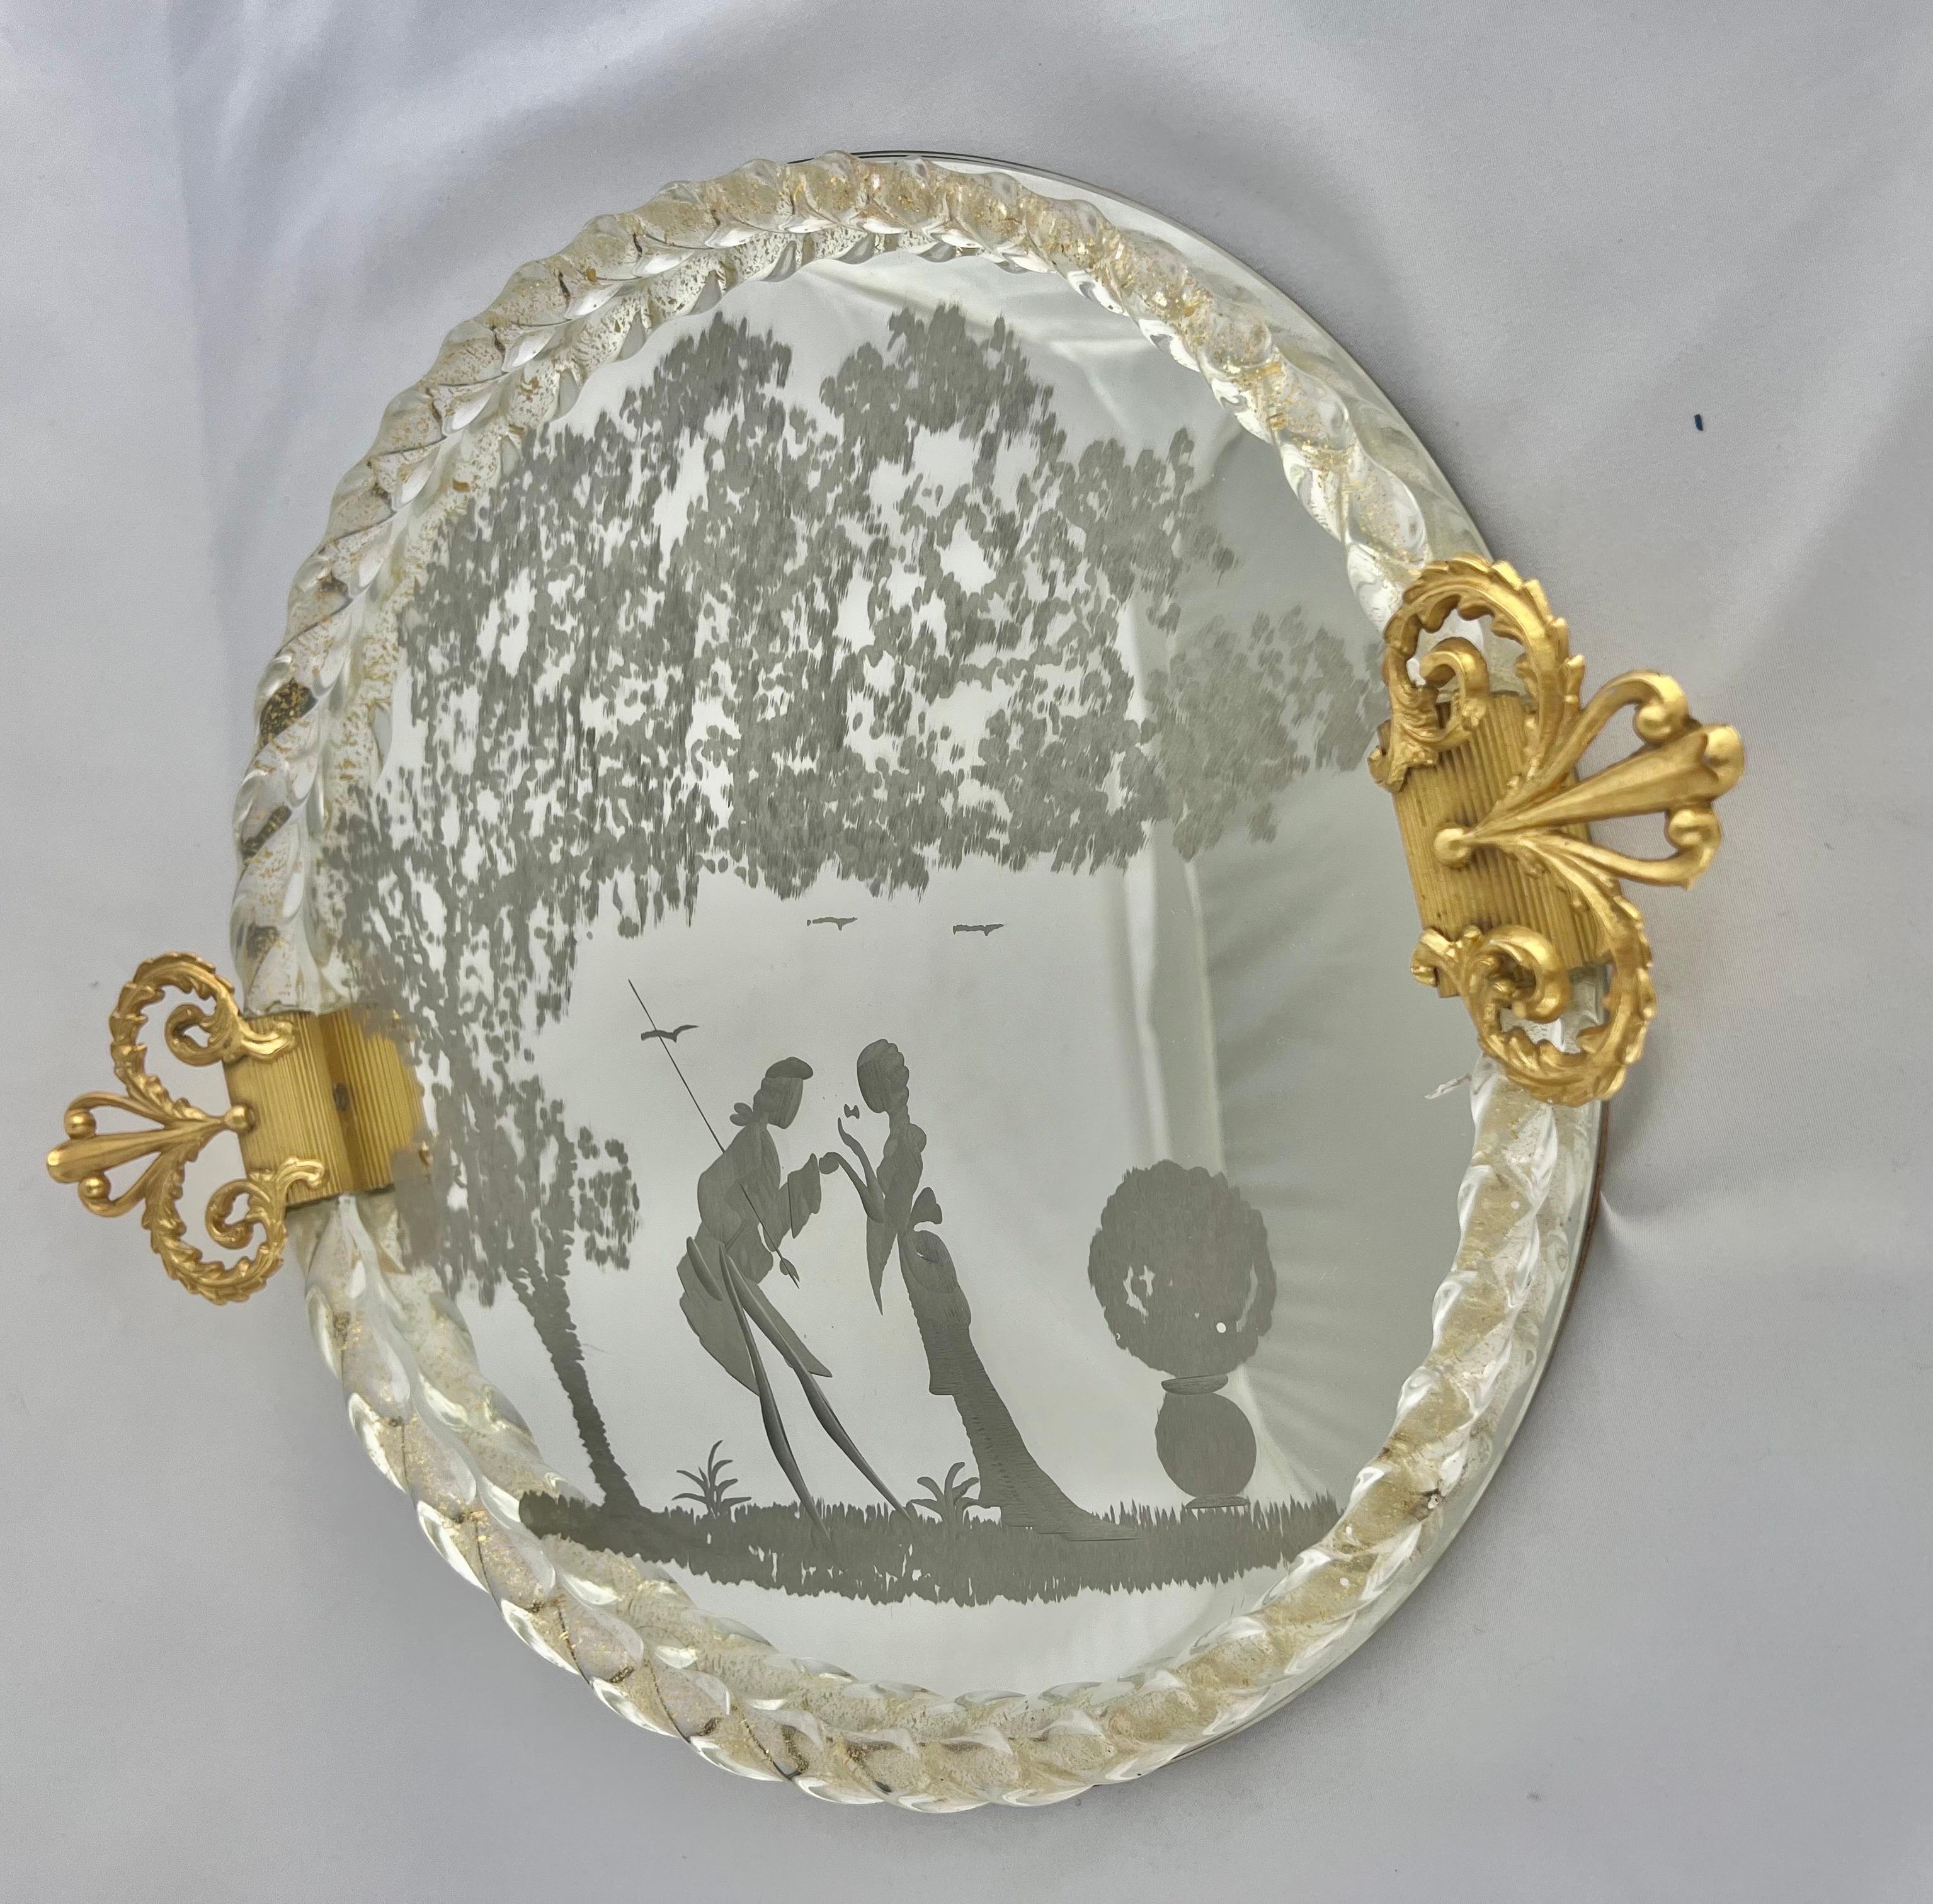 Pour Le Bain-Murano Venetian Etched Mirrored Tray For Sale 5